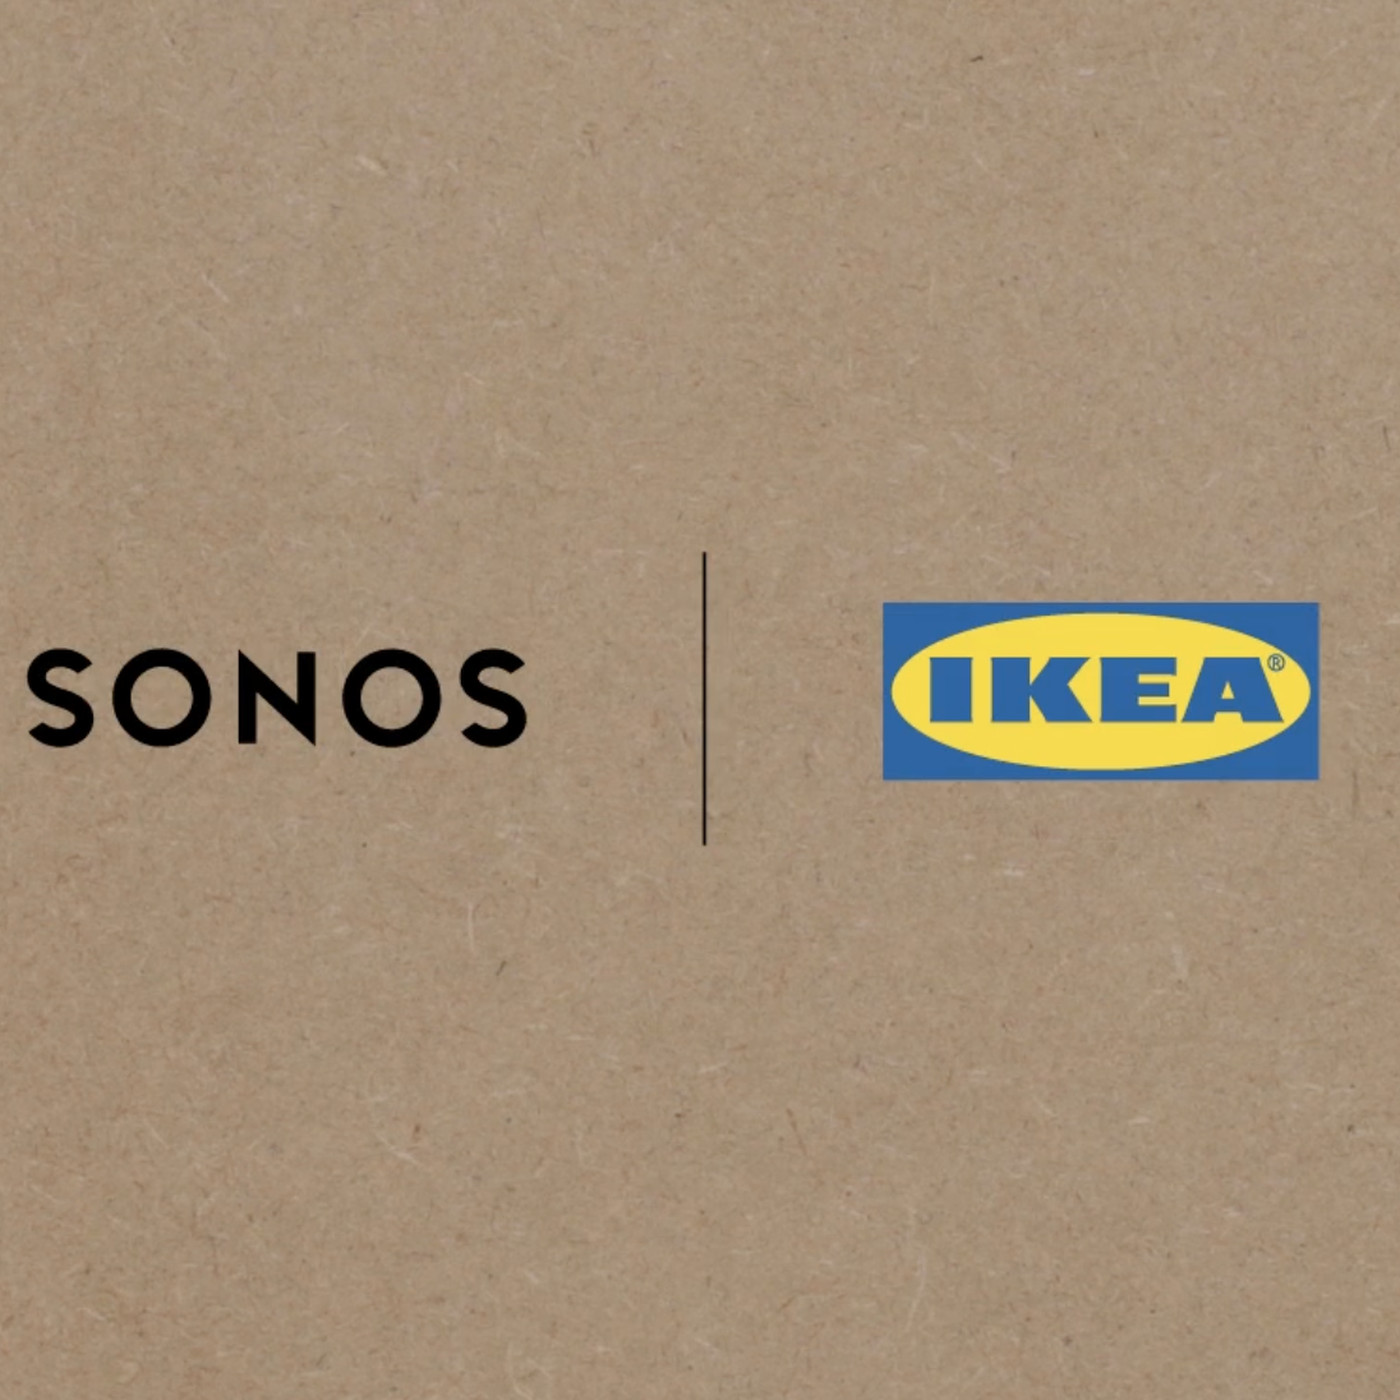 Ikea is working with Sonos on a hidden speaker built into art you hang on  the wall - The Verge